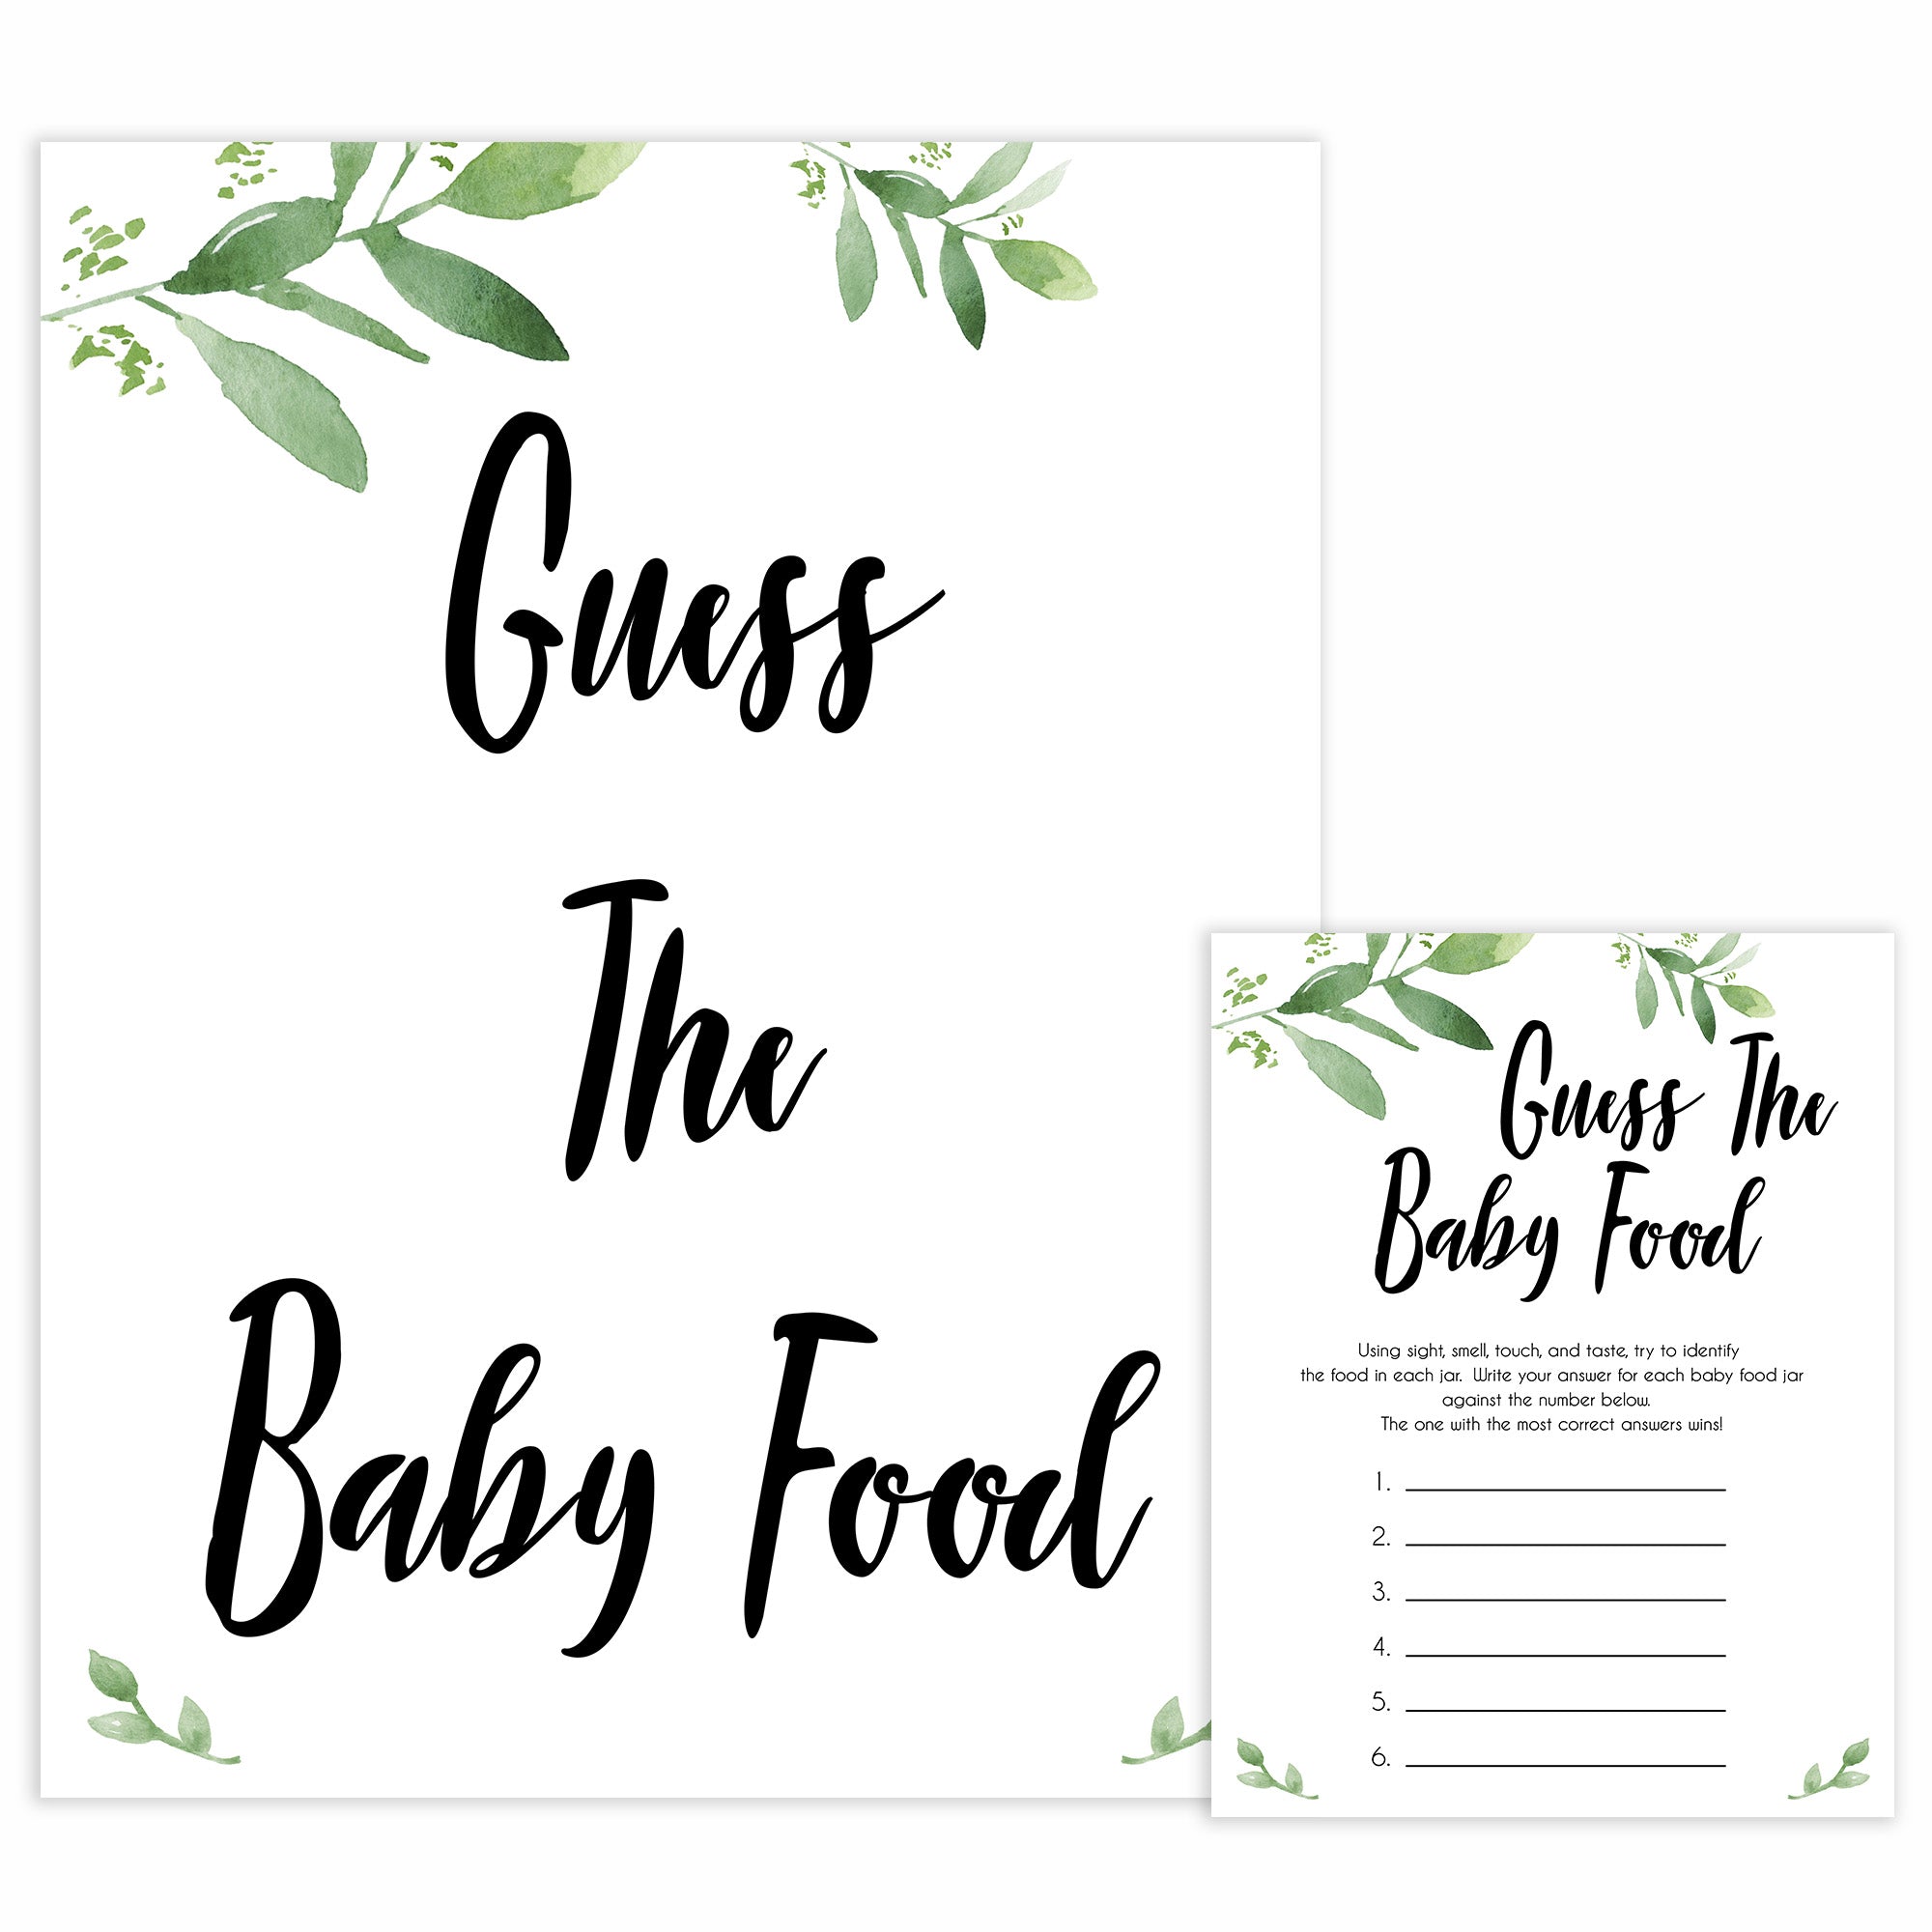 Botanical Baby Shower Guess The Baby Food, Eucalyptus Baby Shower Guess The Baby Food, Botanical Baby Shower Games, Guess The Baby Food, amazing baby shower games, best baby shower games